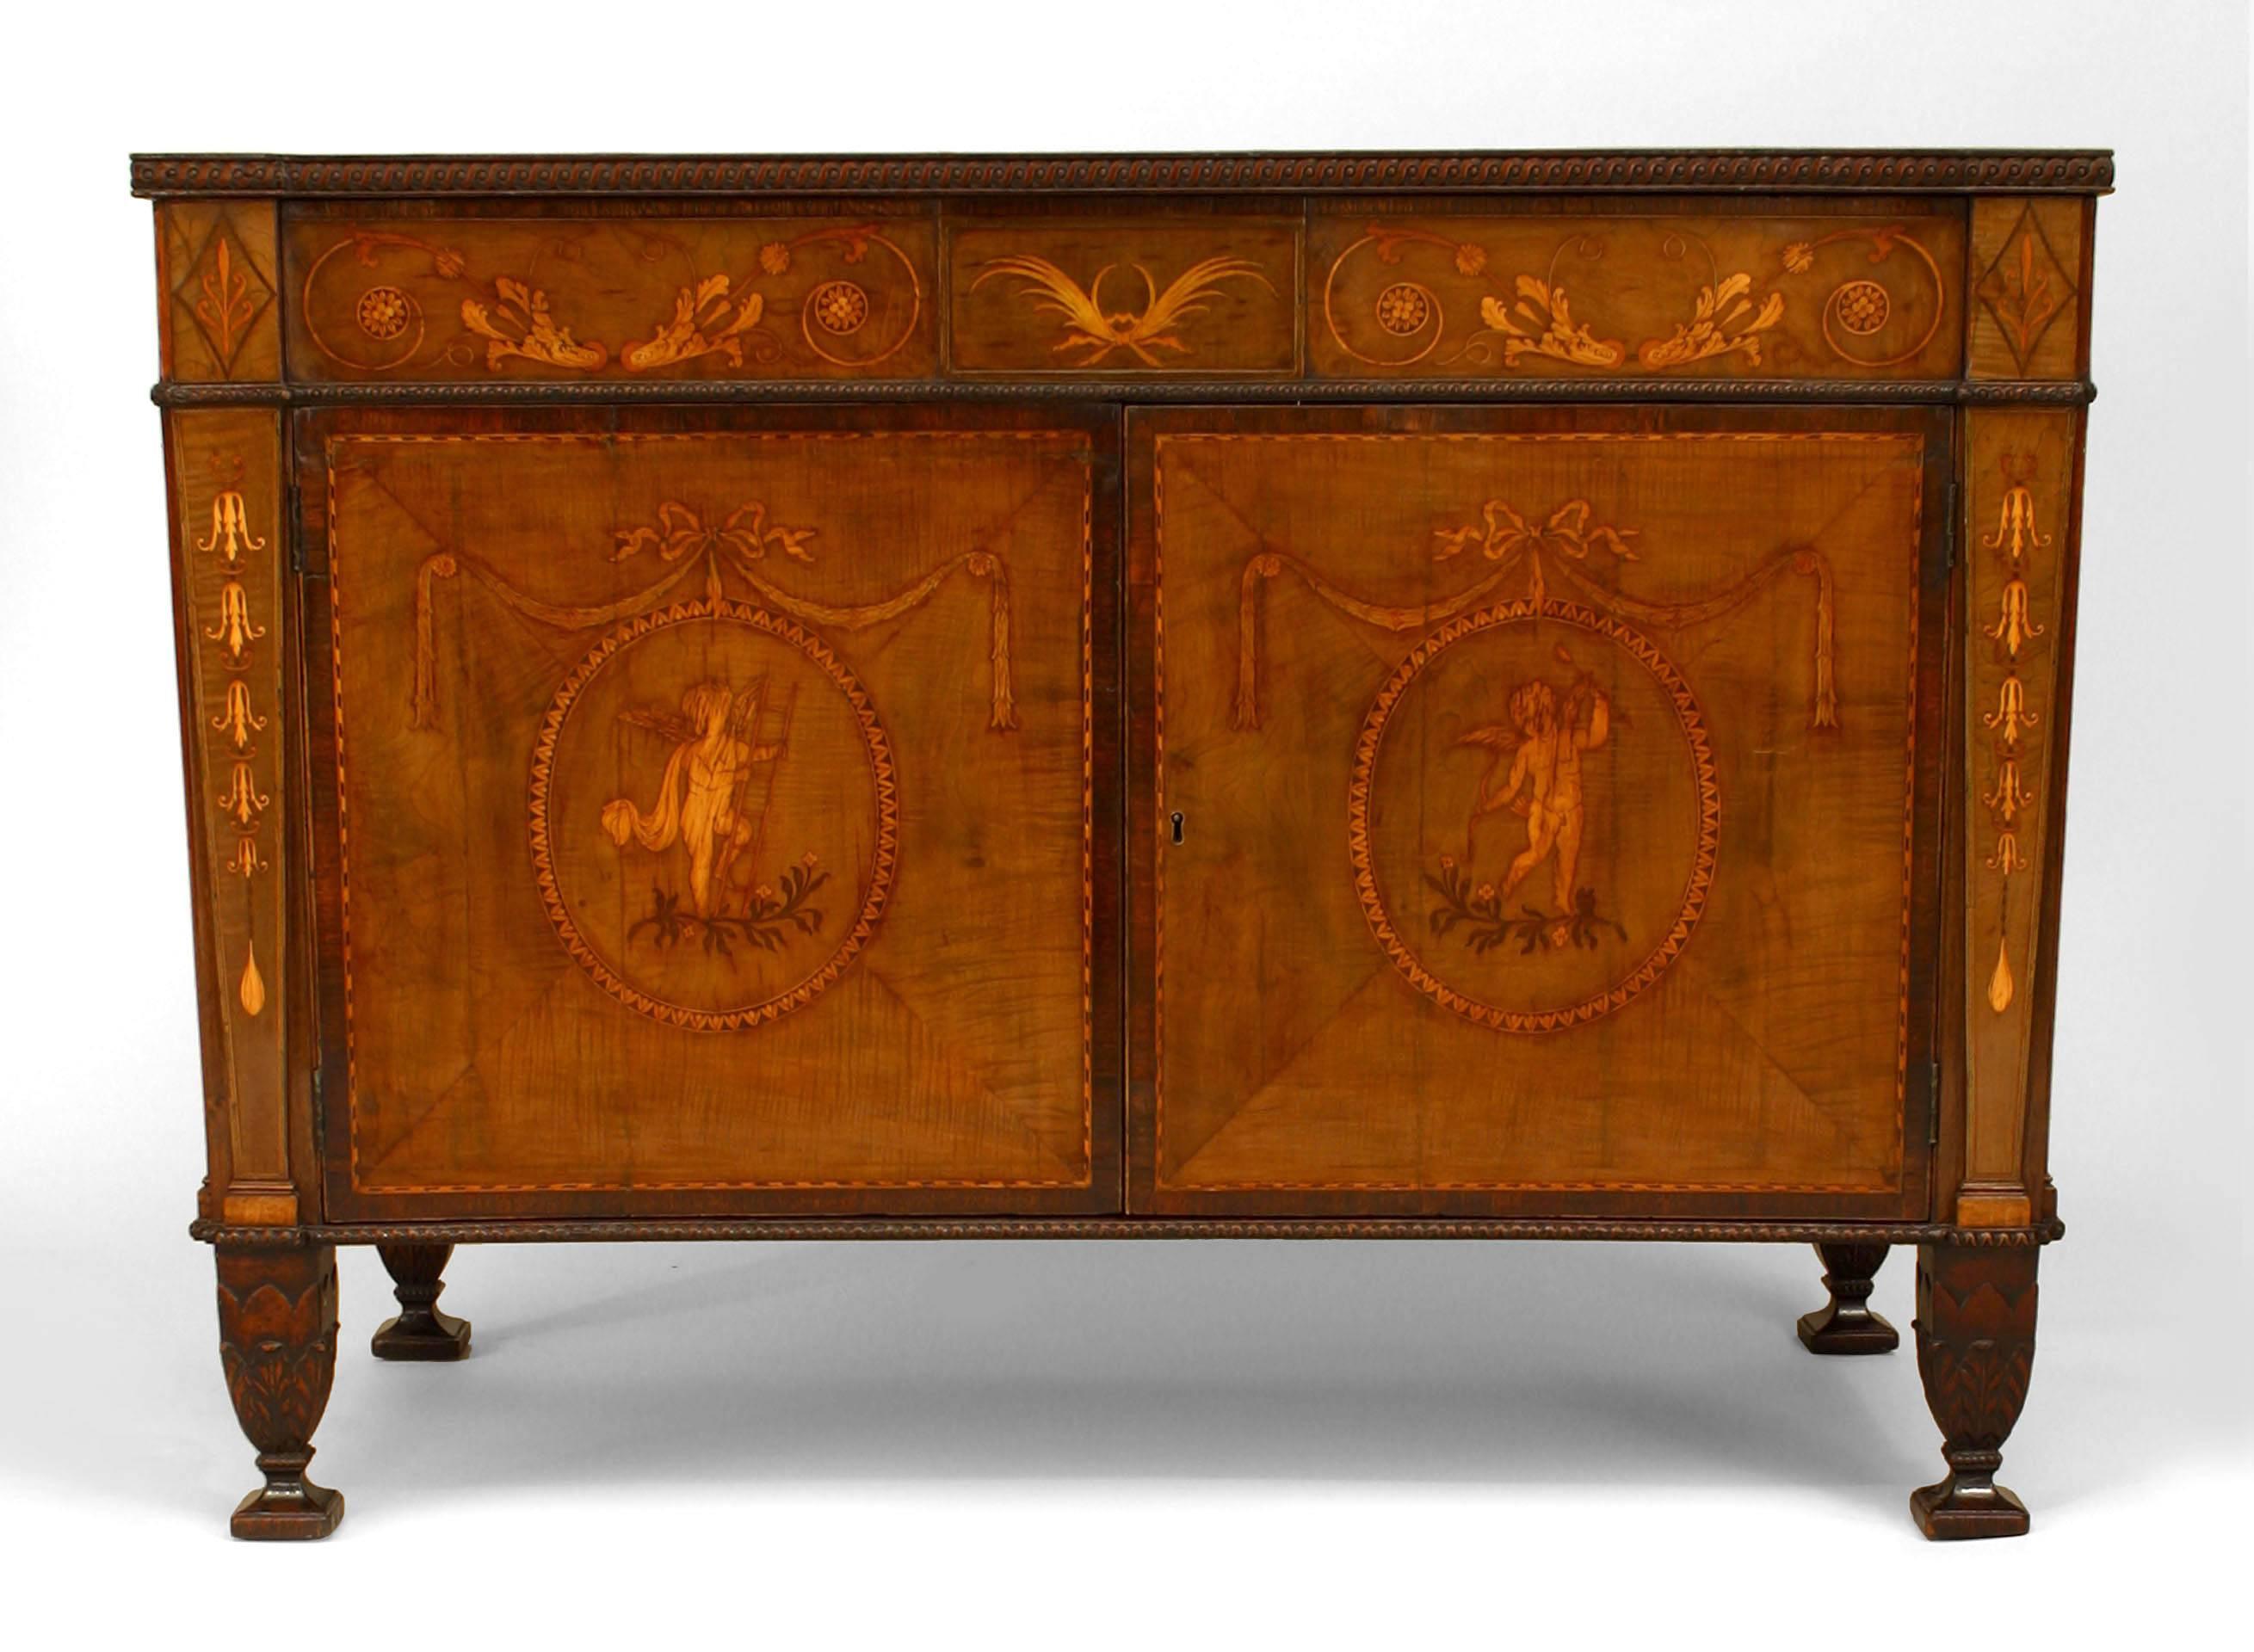 English Adam style (18th Century) mahogany commode with 2 doors and satinwood inlaid figures, swags and decoration supported on carved square tapered feet (Attributed to INCE & MAYHEW)
